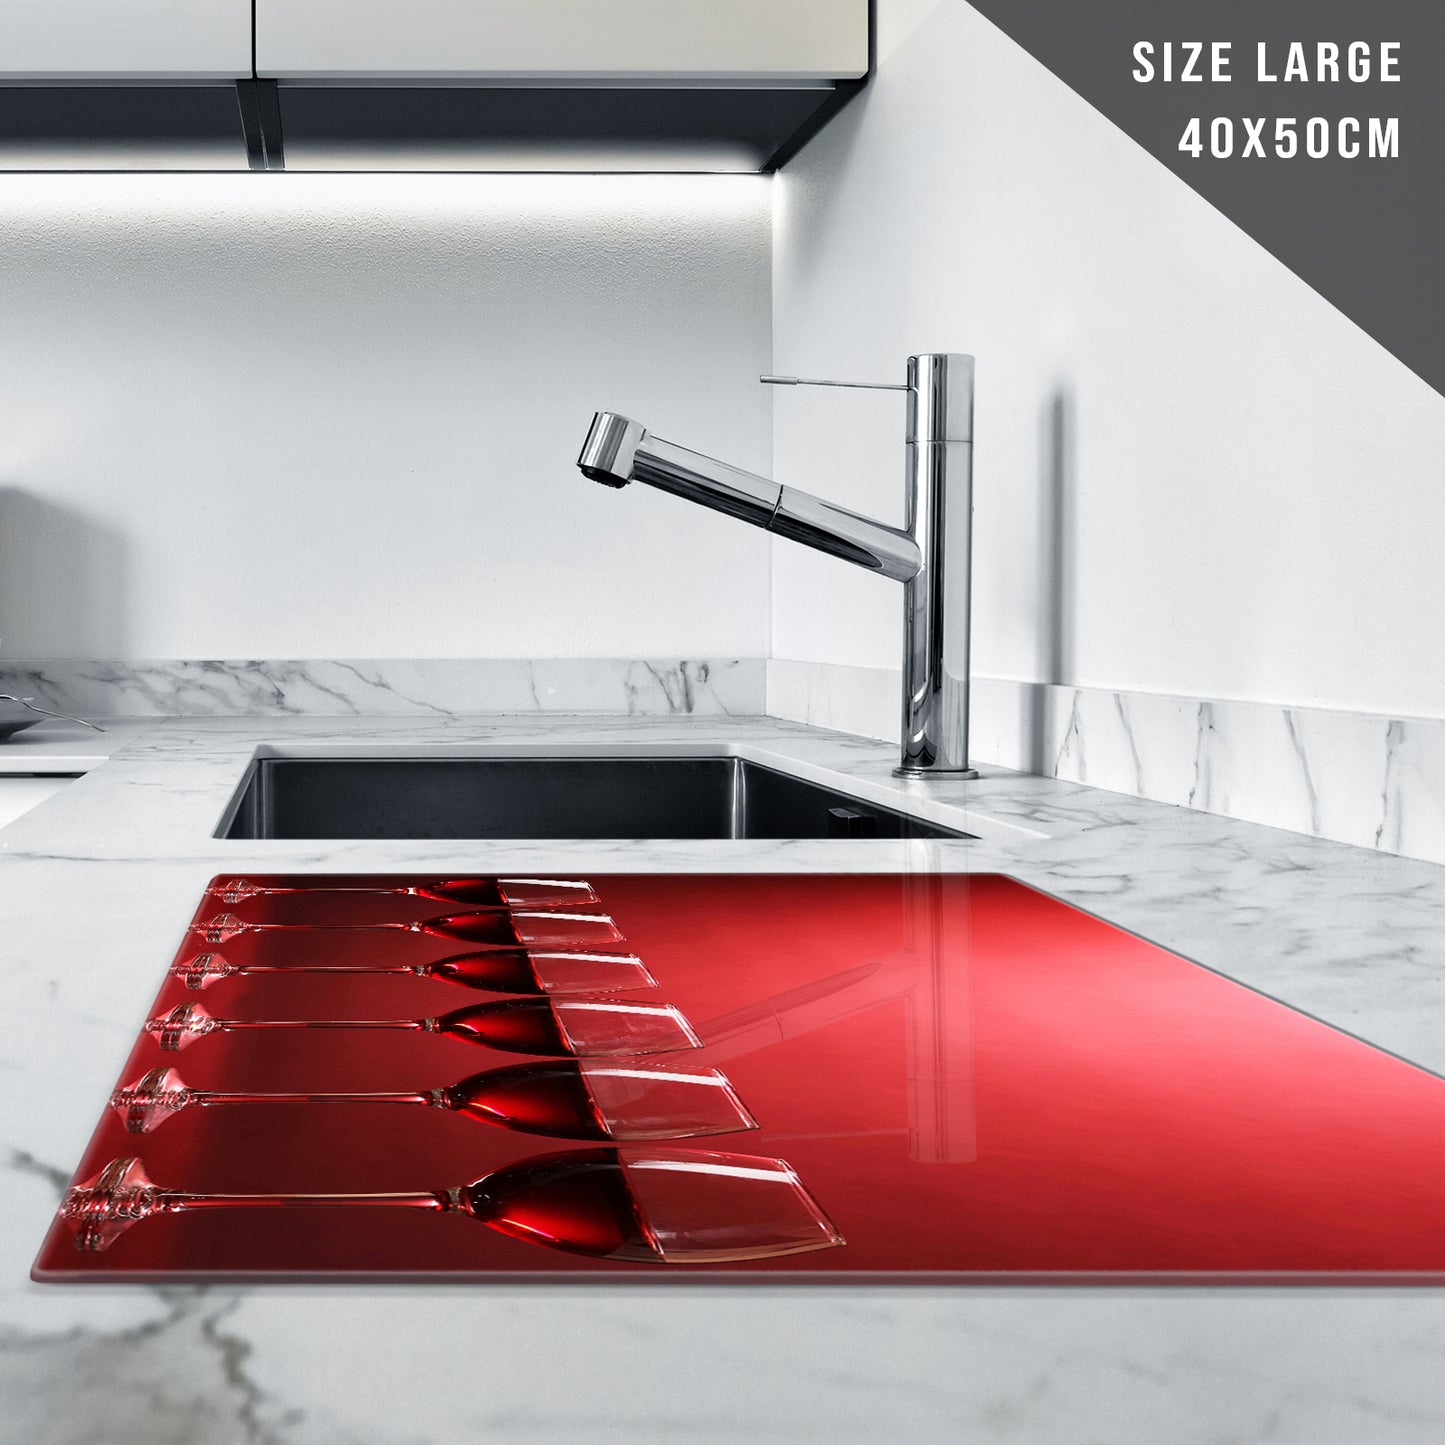 Glass Chopping Board for Kitchen in Red Wine Glass Design